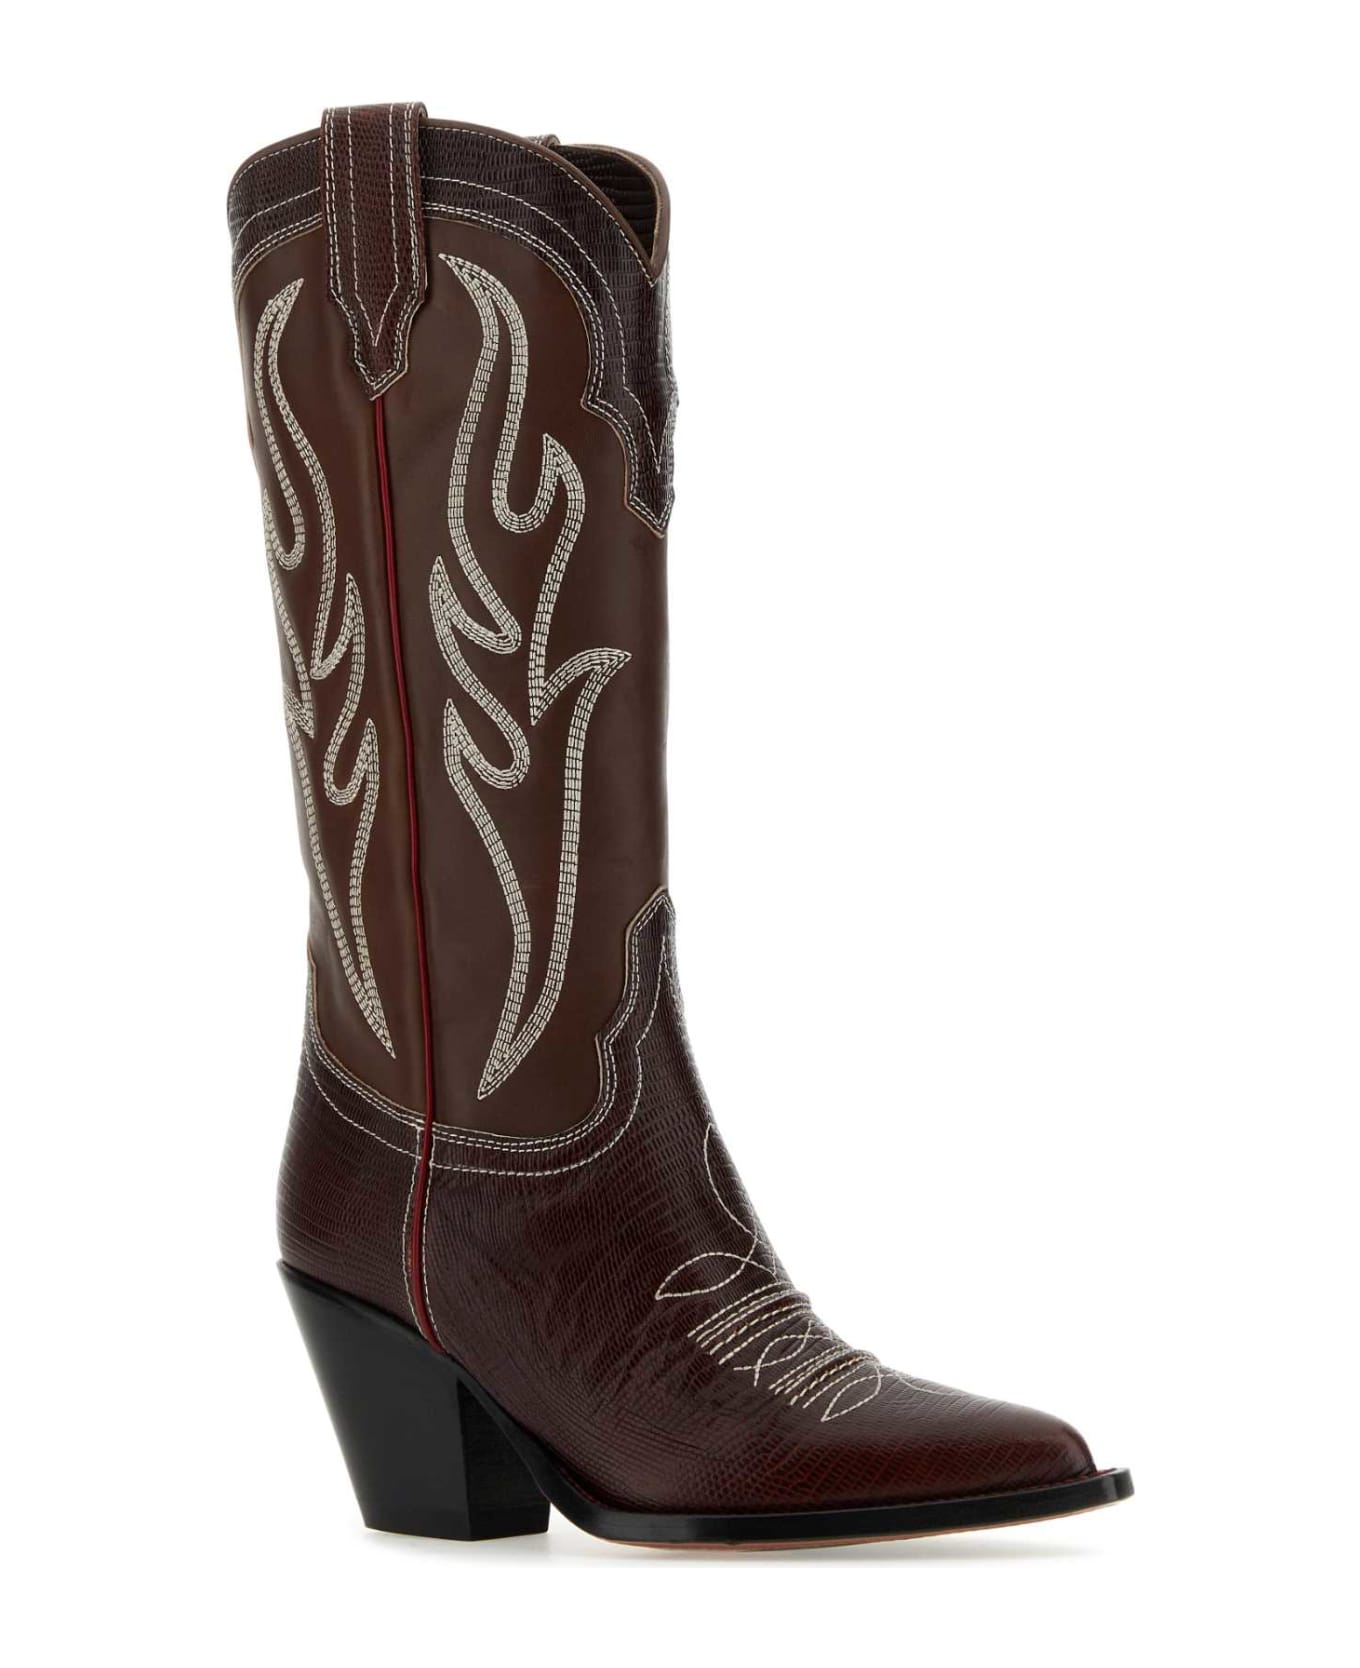 Sonora Brown Leather Santa Fe Boots - BROWN